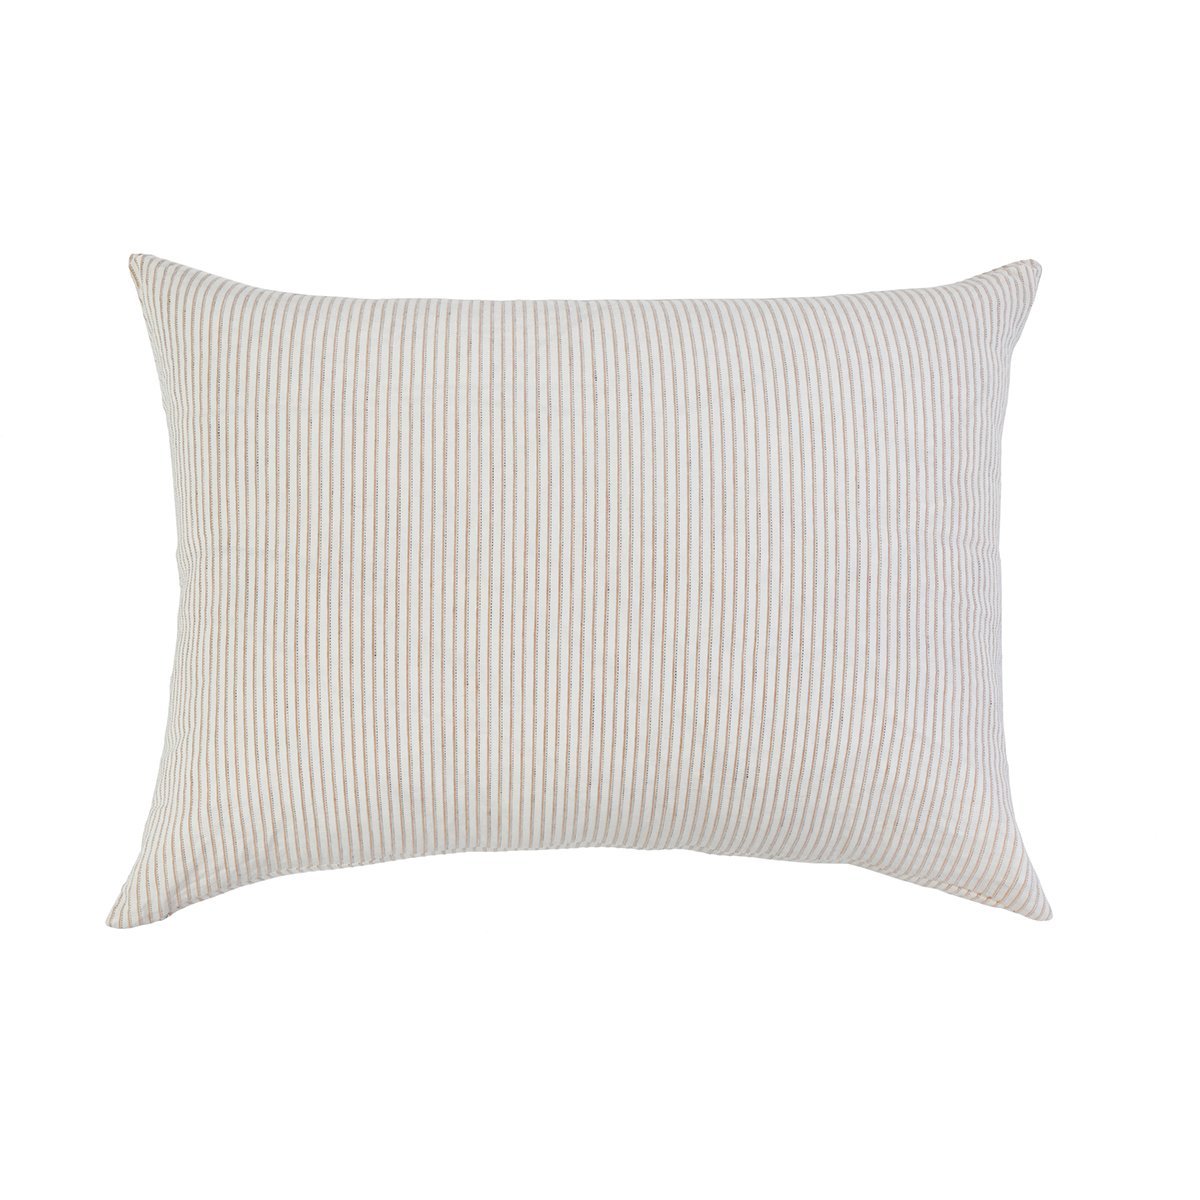 CONNOR BIG PILLOW 28&quot; X 36&quot; WITH INSERT - Ivory/Amber -Pom Pom at Home